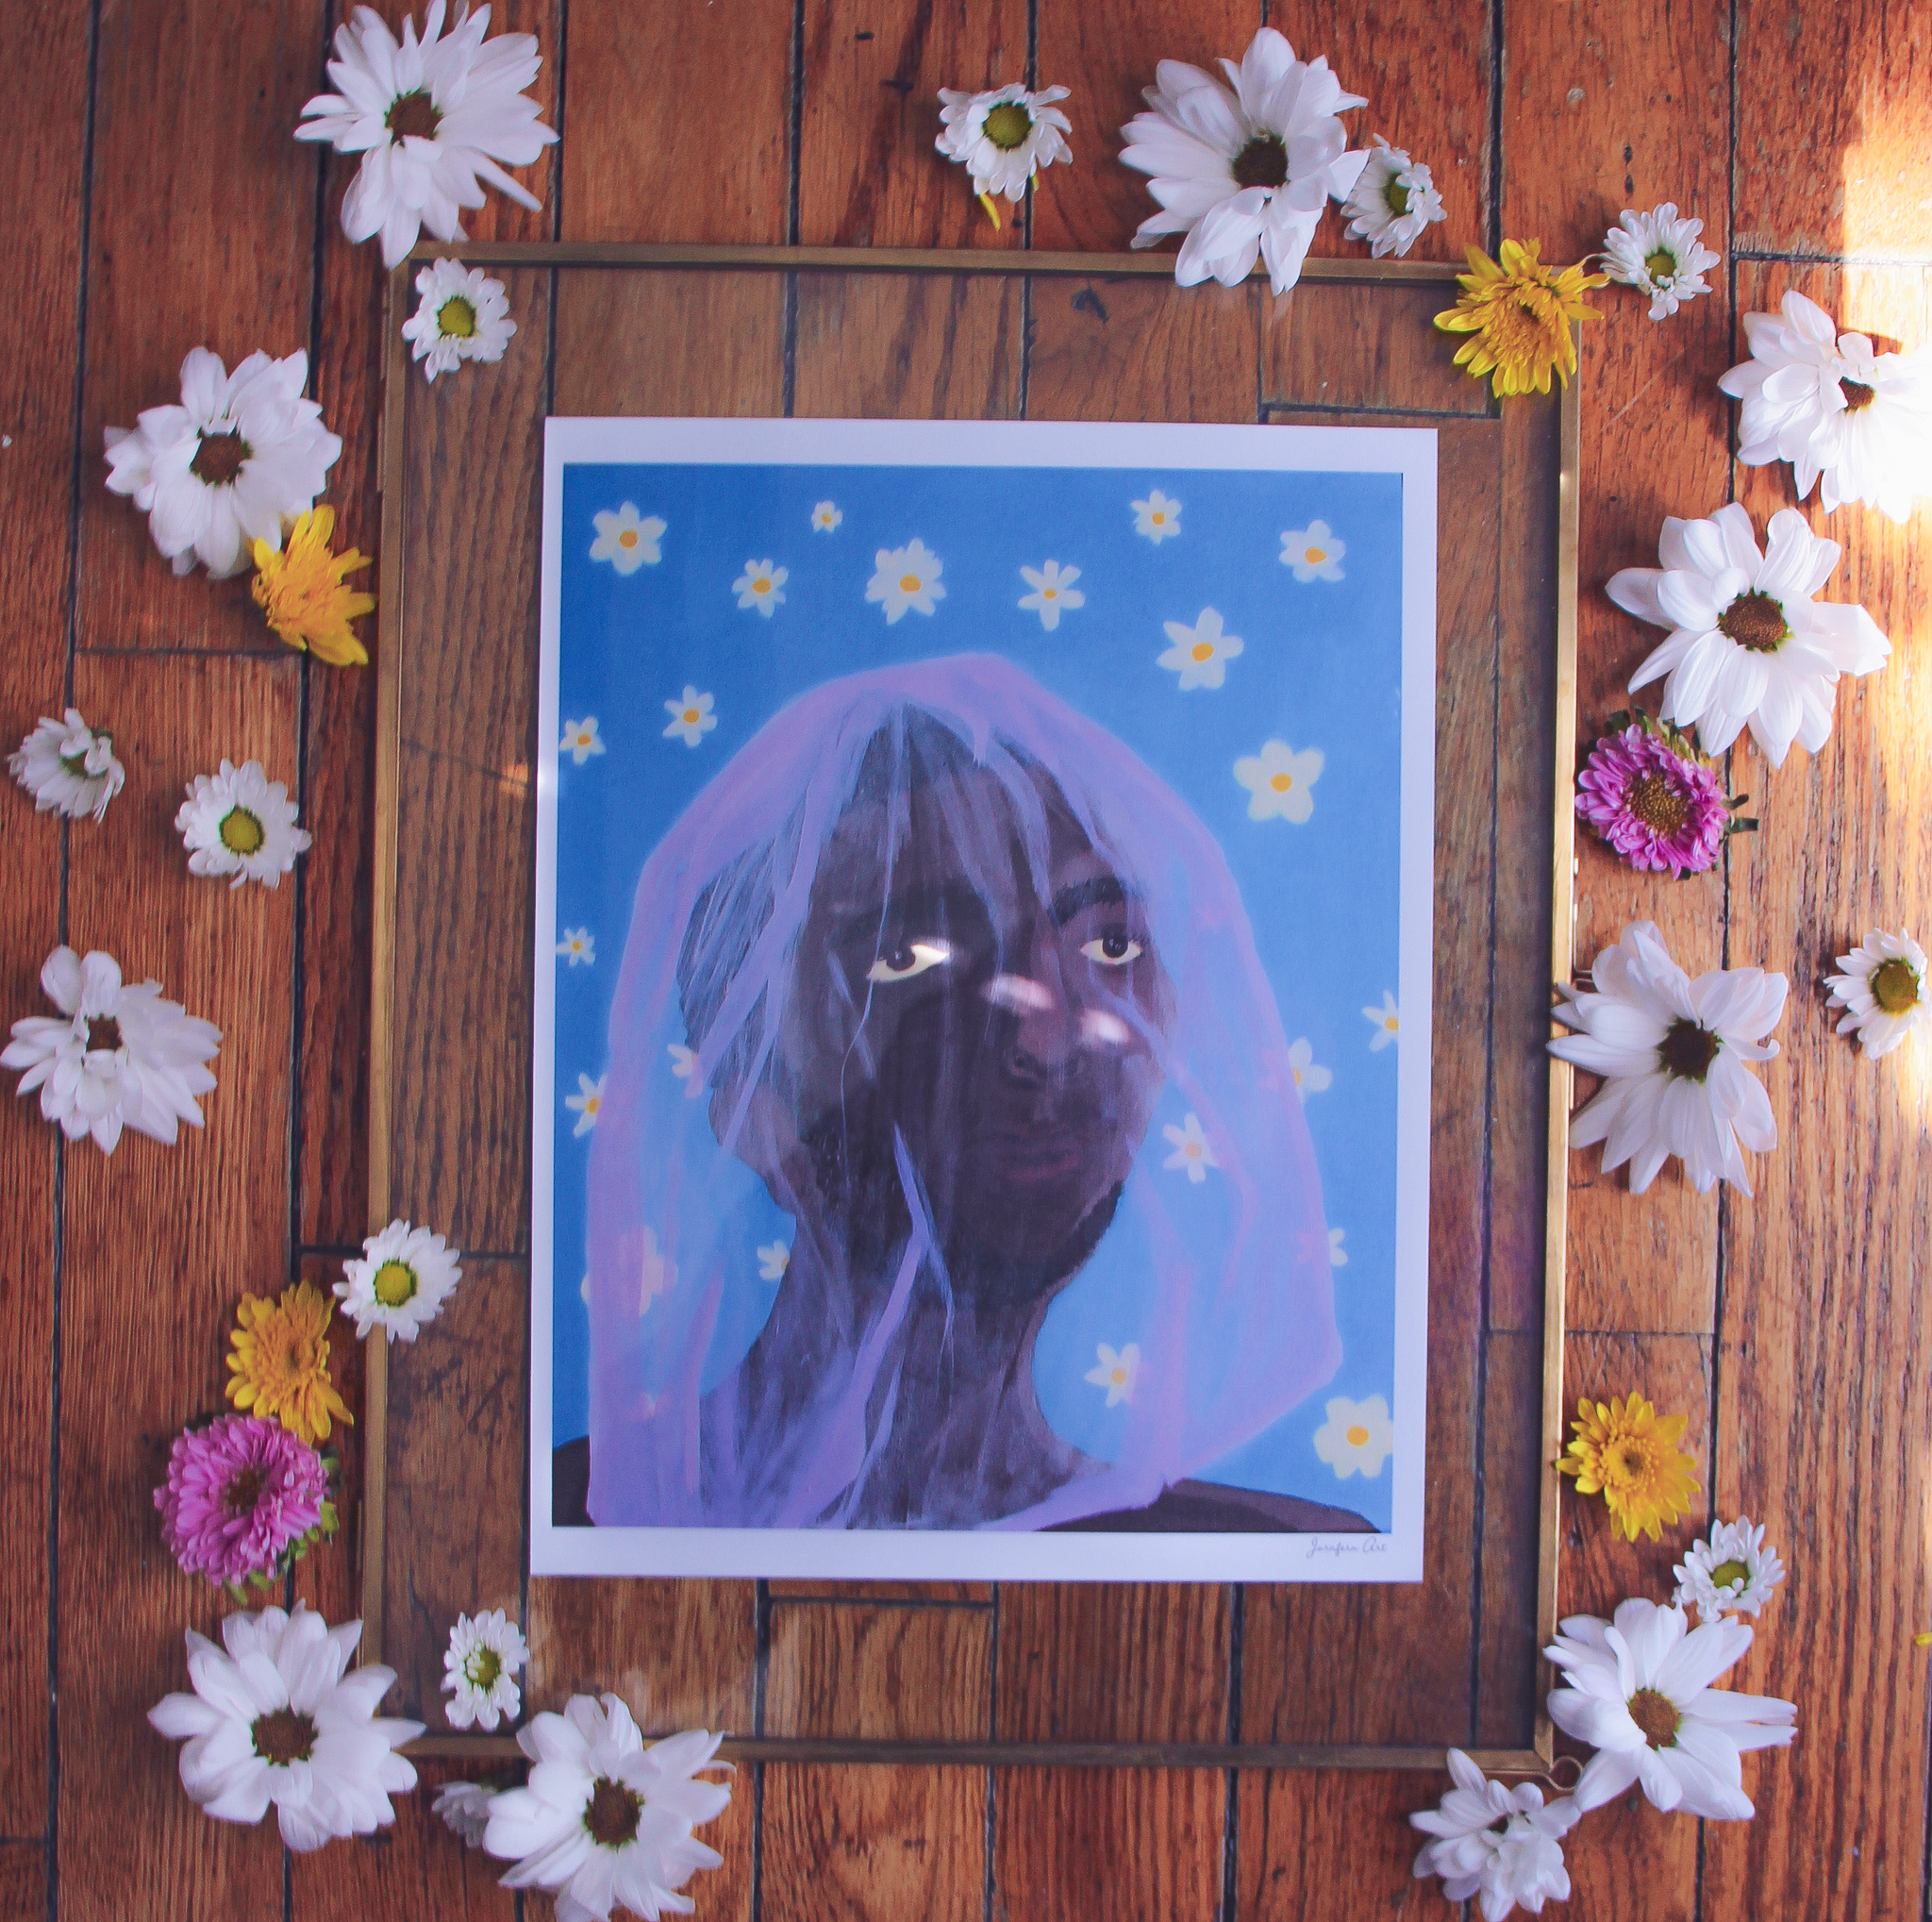 A painting of a man wearing a purple veil over his face with a blue background with white daisies, inside of a gold frame surrounded by fresh daisies